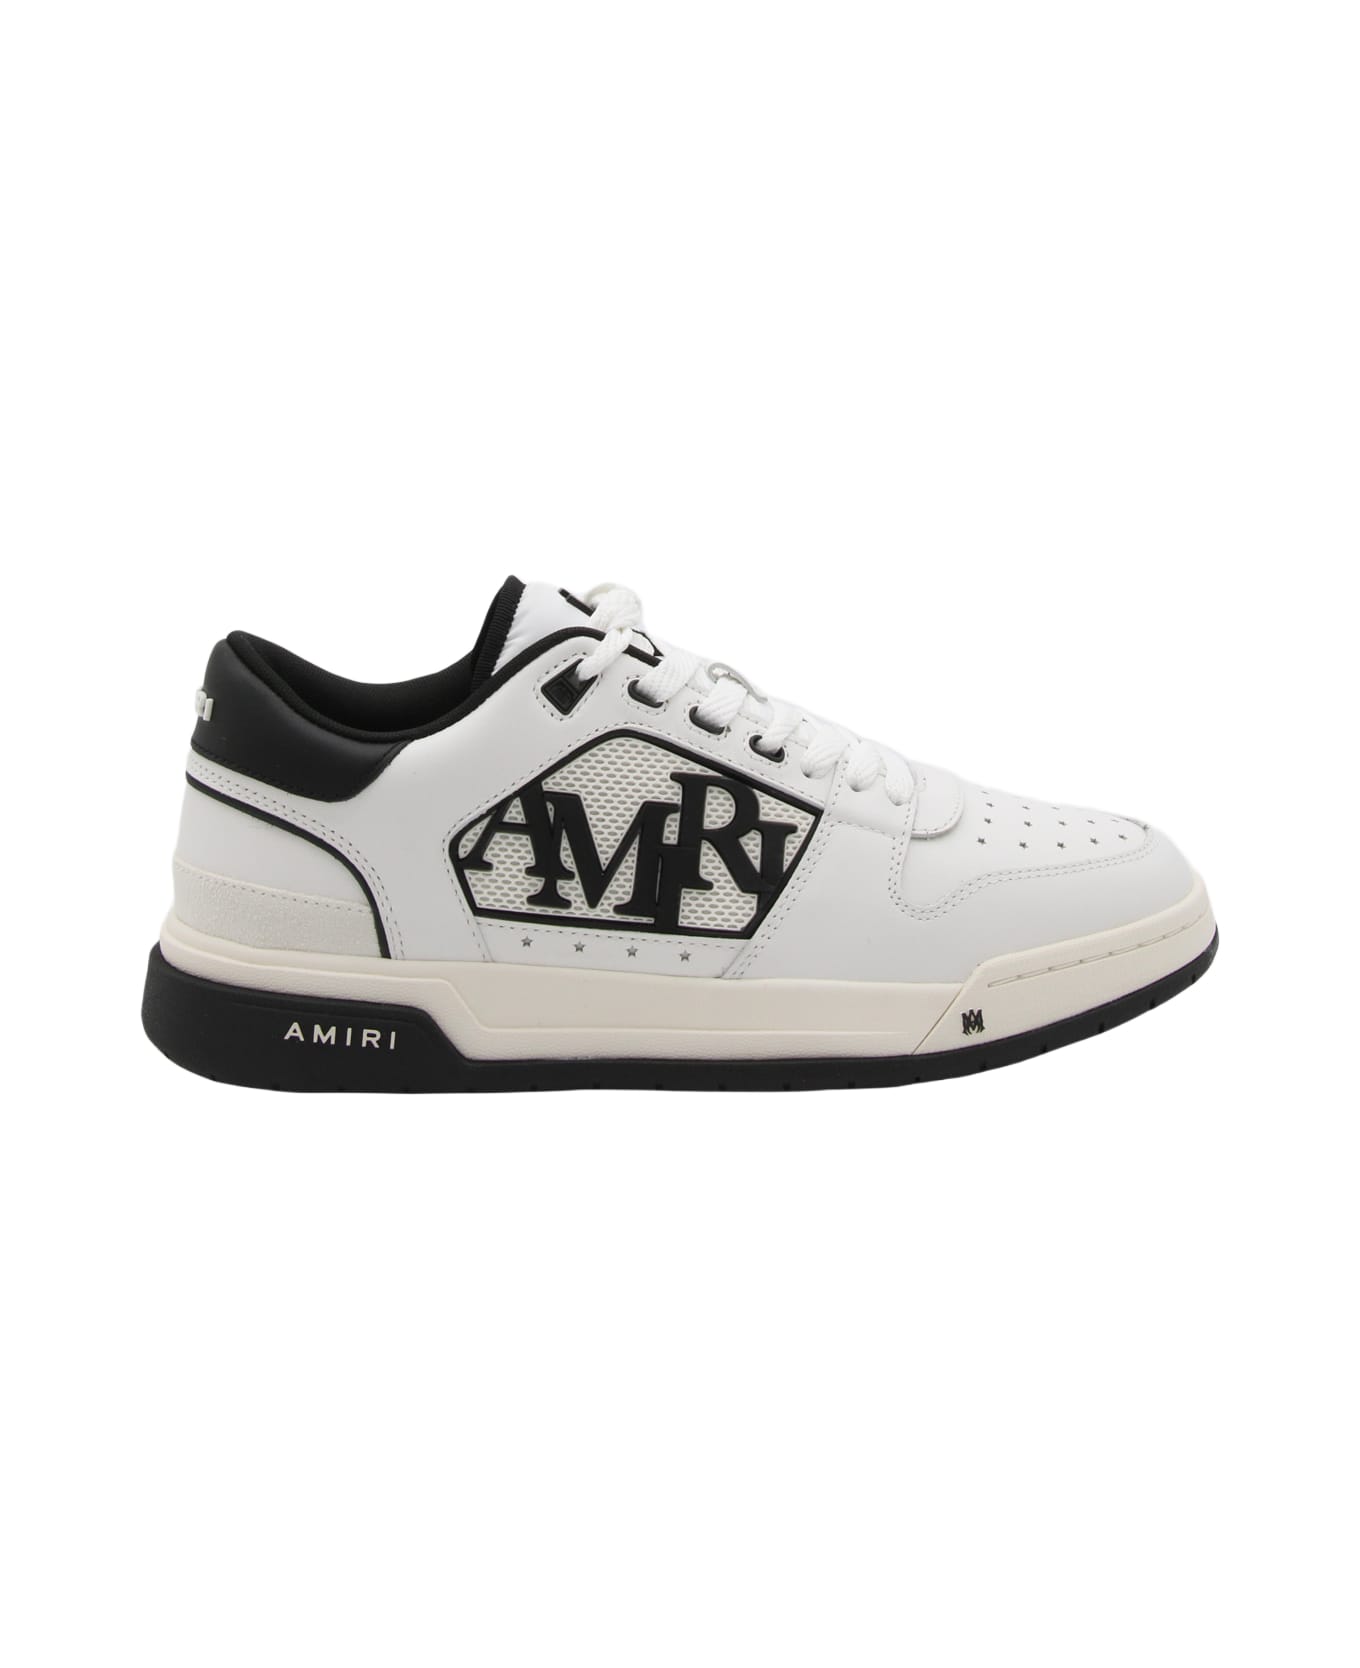 AMIRI White And Black Leather Sneakers - White スニーカー